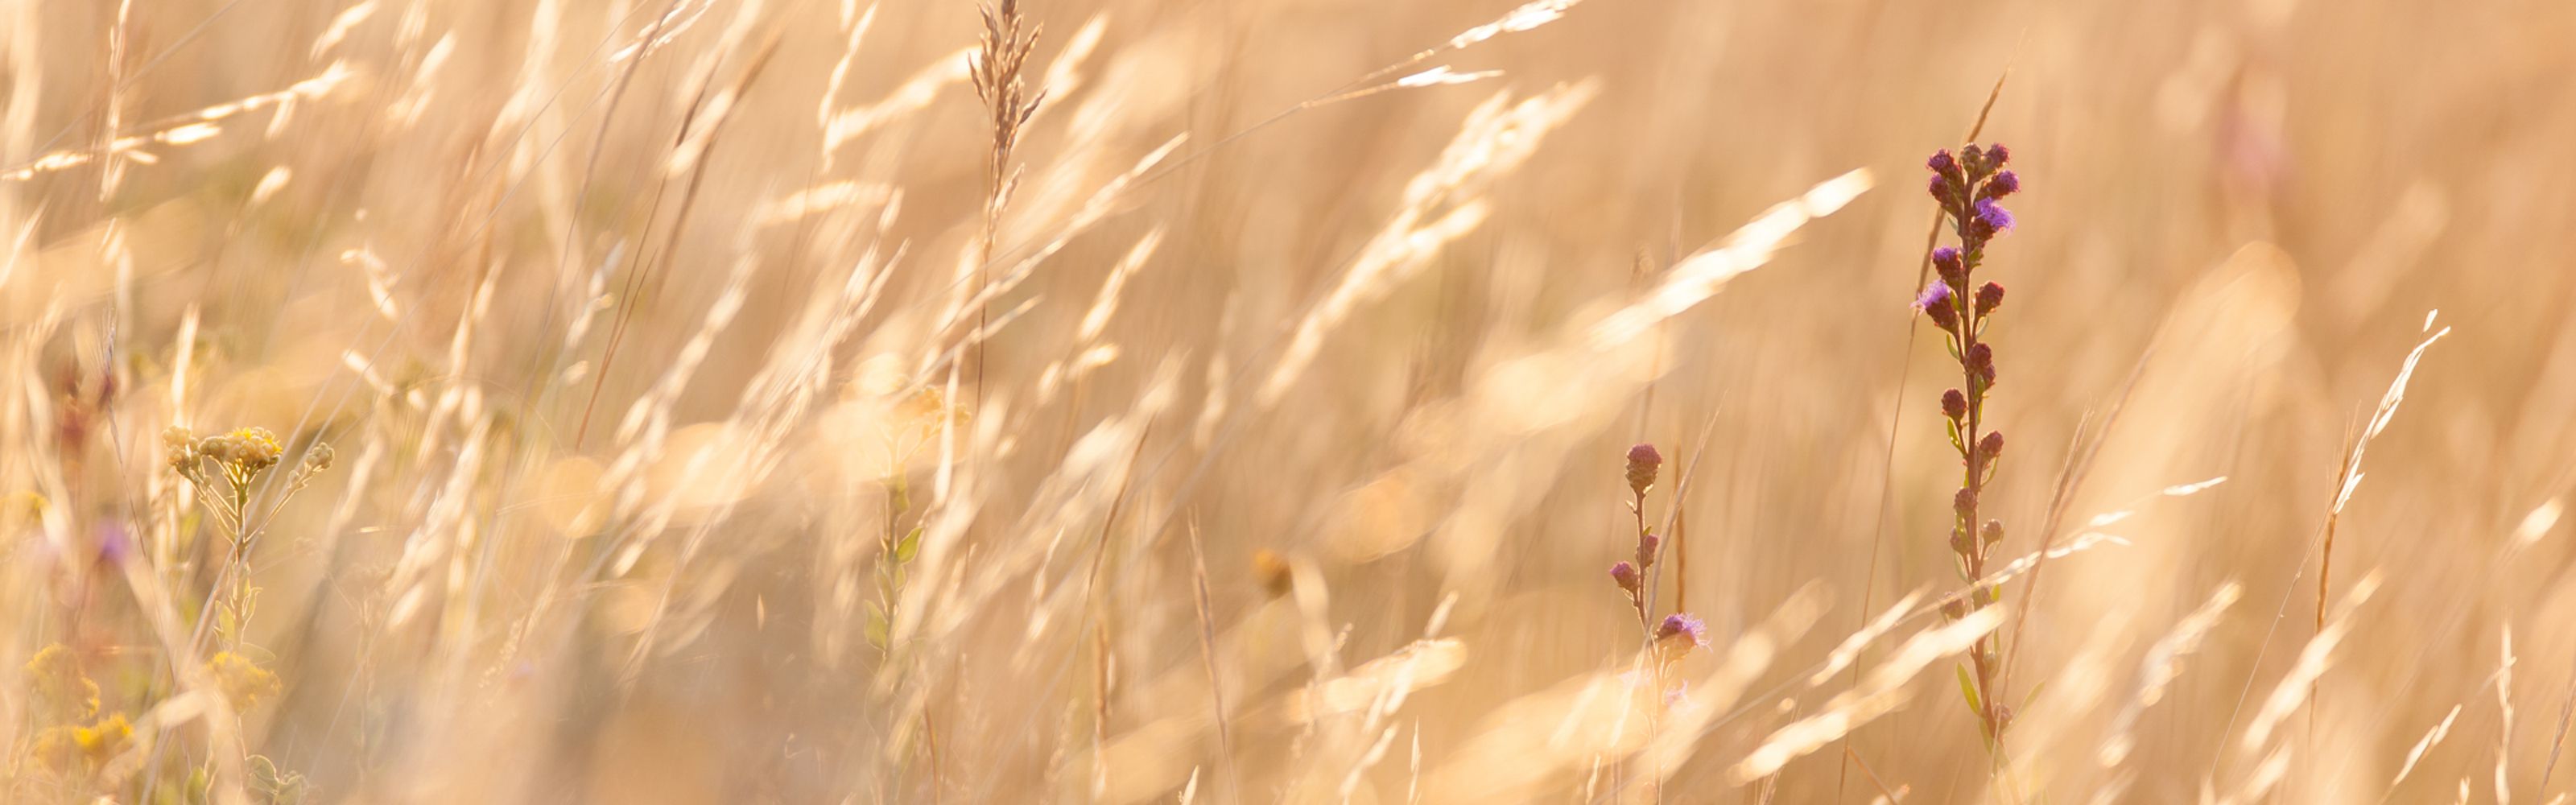 Closeup of golden grasses swaying in a breeze.